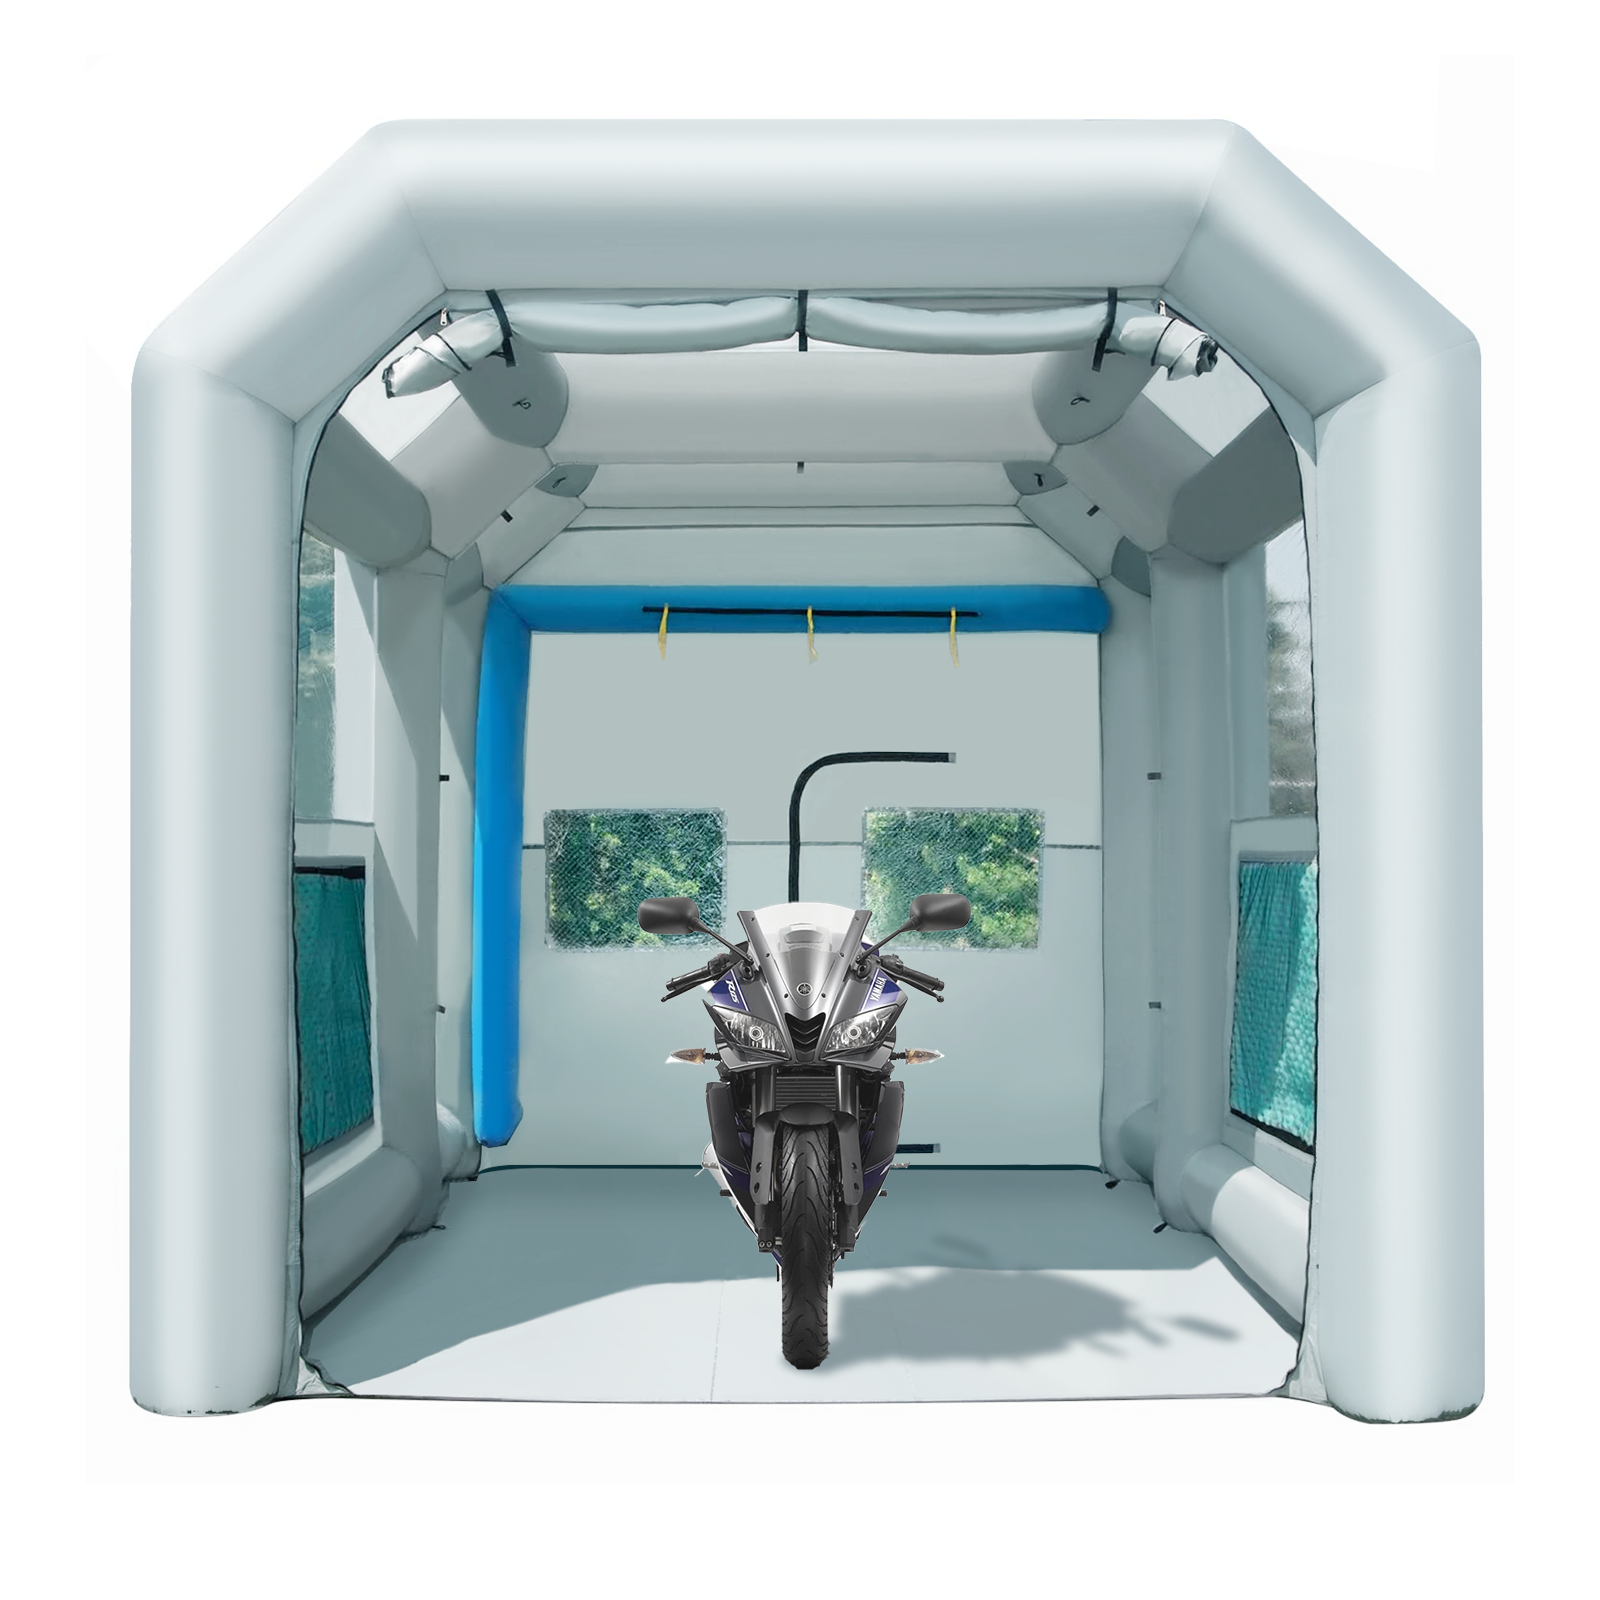 Sewinfla Professional Inflatable Paint Booth 20x10x9Ft with 2 Blowers (480W+1100W) & Air Filter System Portable Paint Booth Tent Garage Inflatable